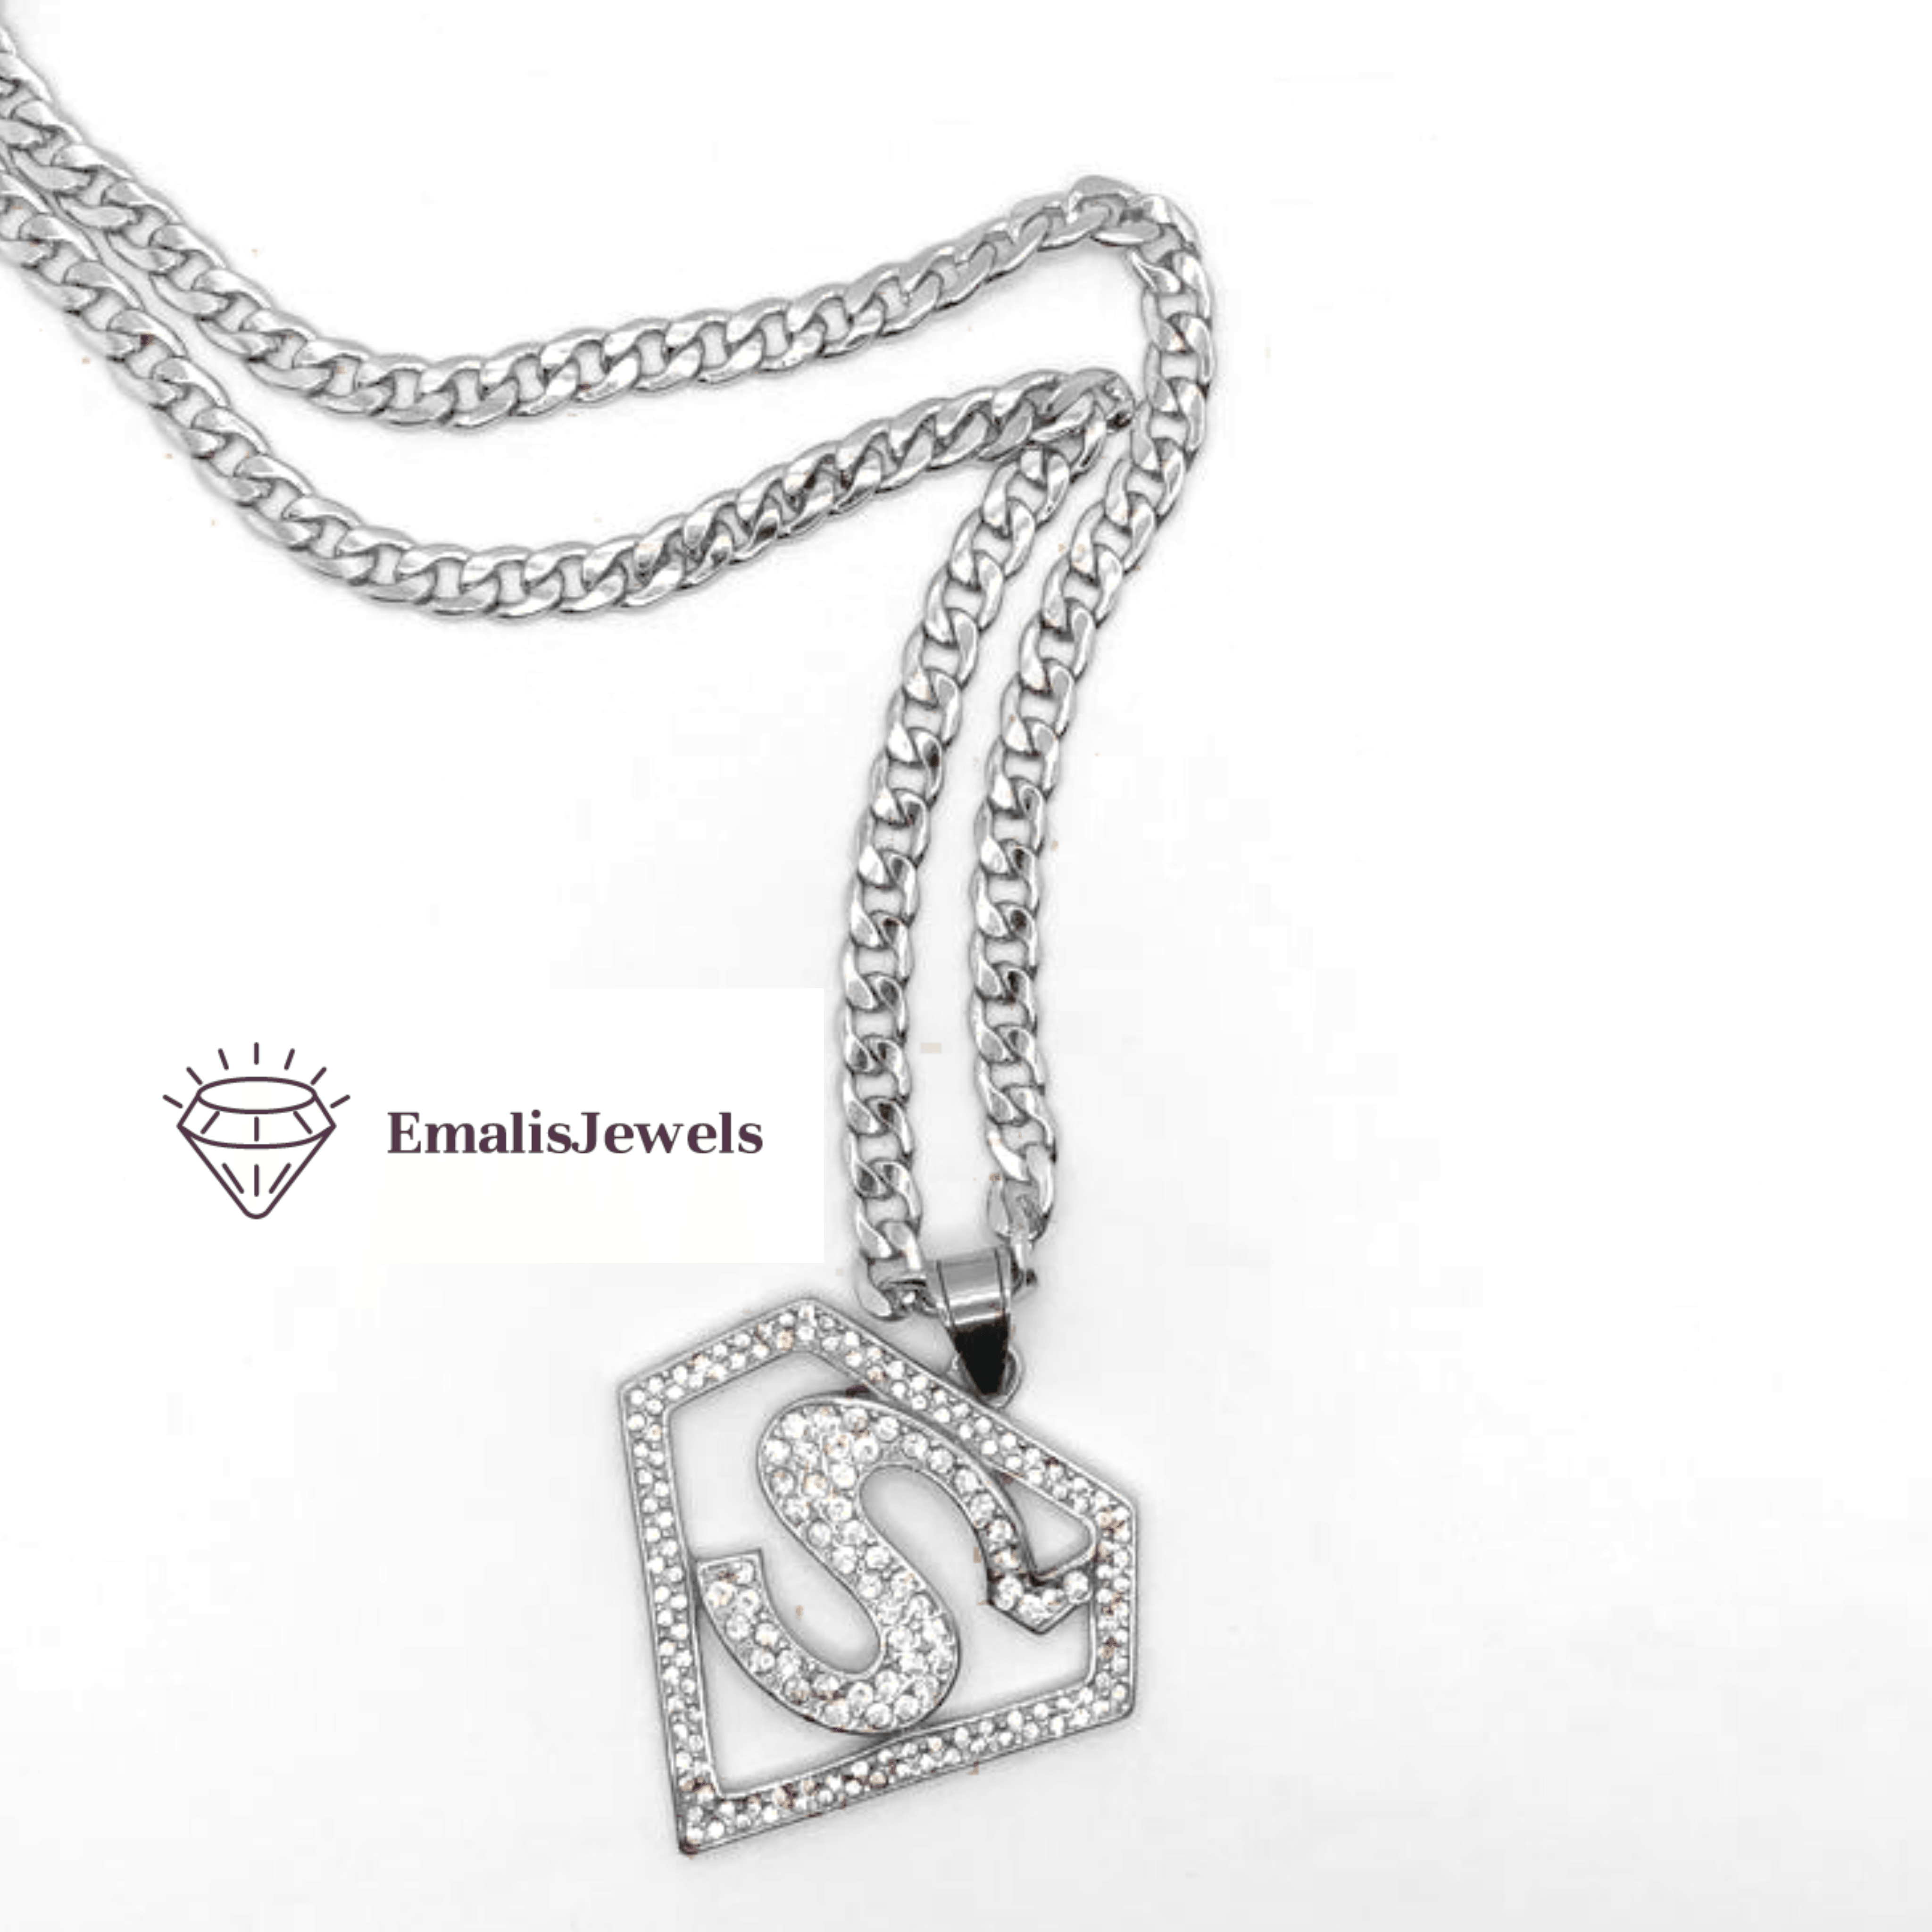 Stainless Steel Chain Necklace and Stainless Steel Super Hero S Pendant